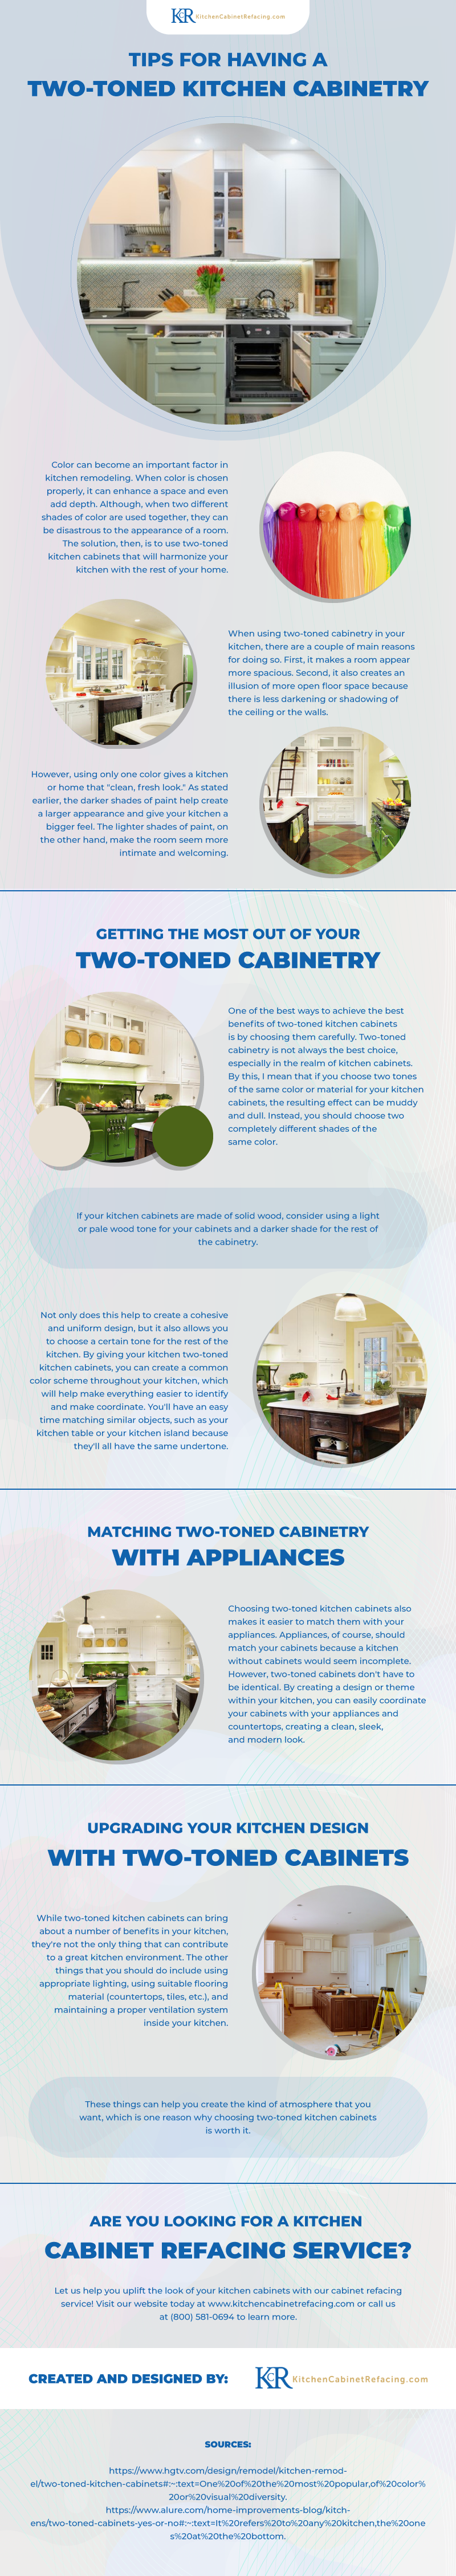  Tips_for_Having_a_Two_Toned_Kitchen_Cabinetry_infographic